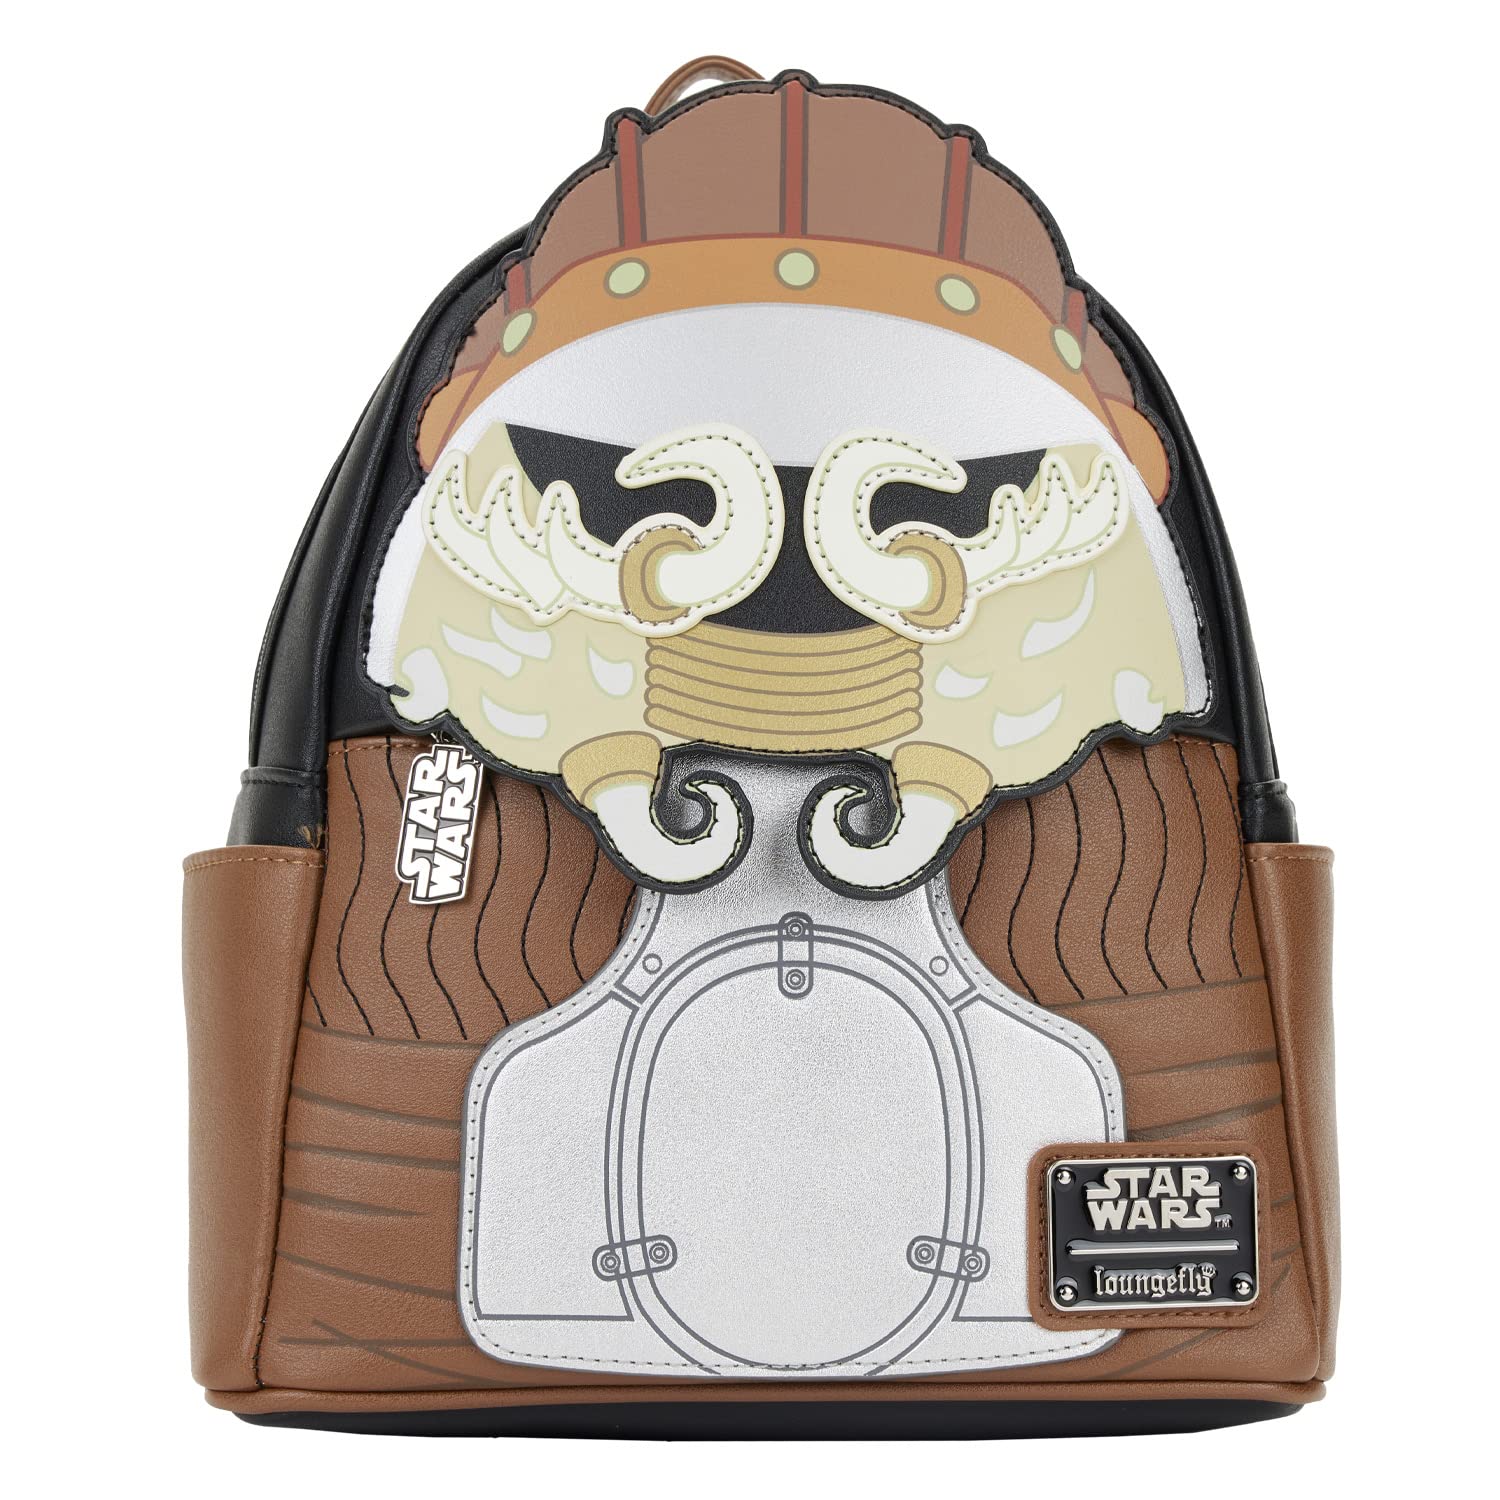 LOUNGEFLY STAR WARS LANDO AND JABBA BACKPACK